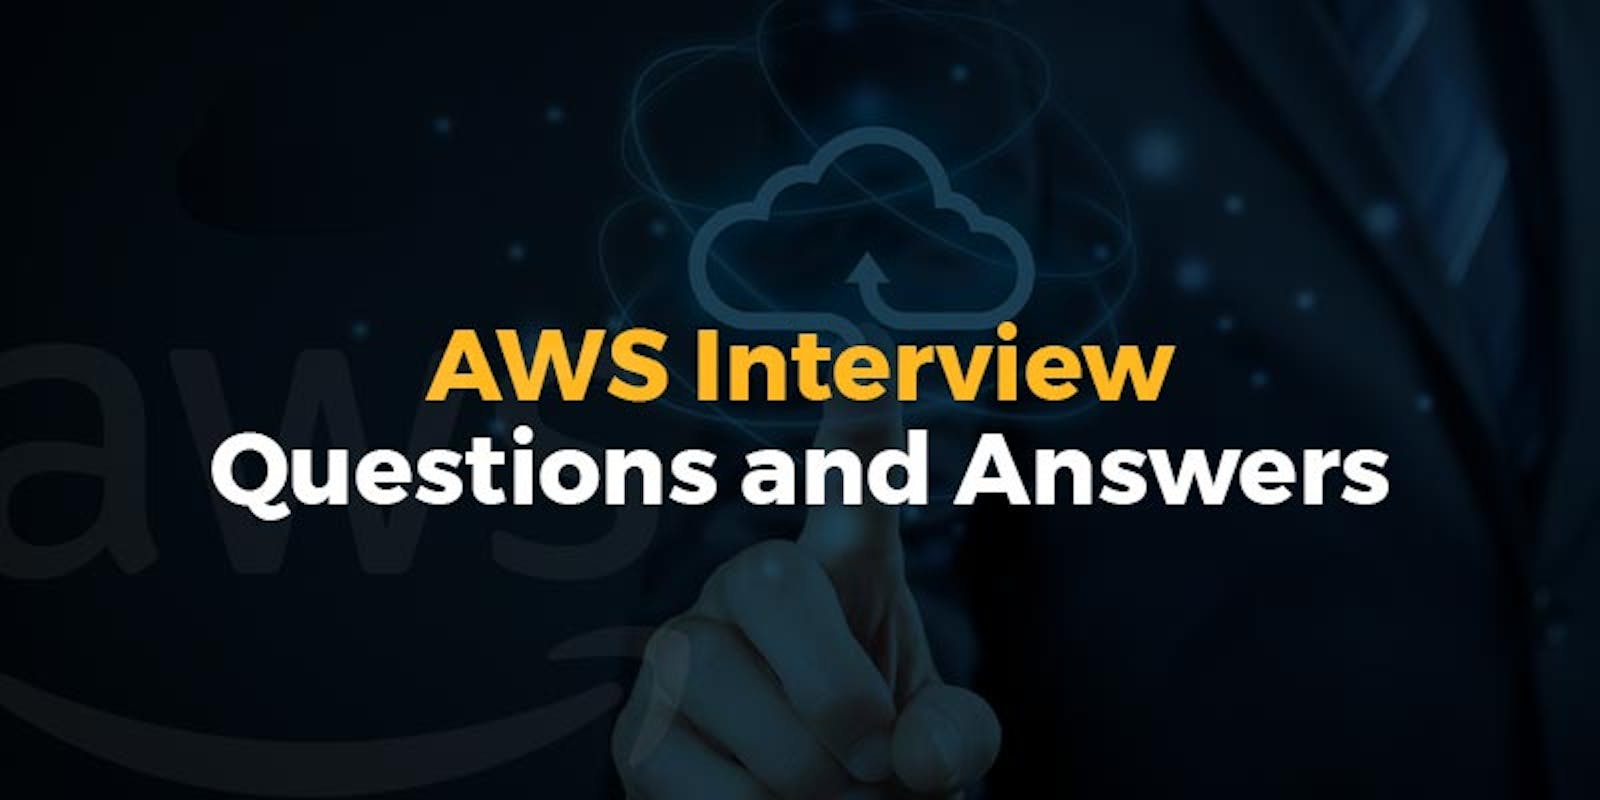 🌟 AWS Scenario-Based Questions & Answers 🌟
IAM, S3, VPC, and IAM Roles 🚀